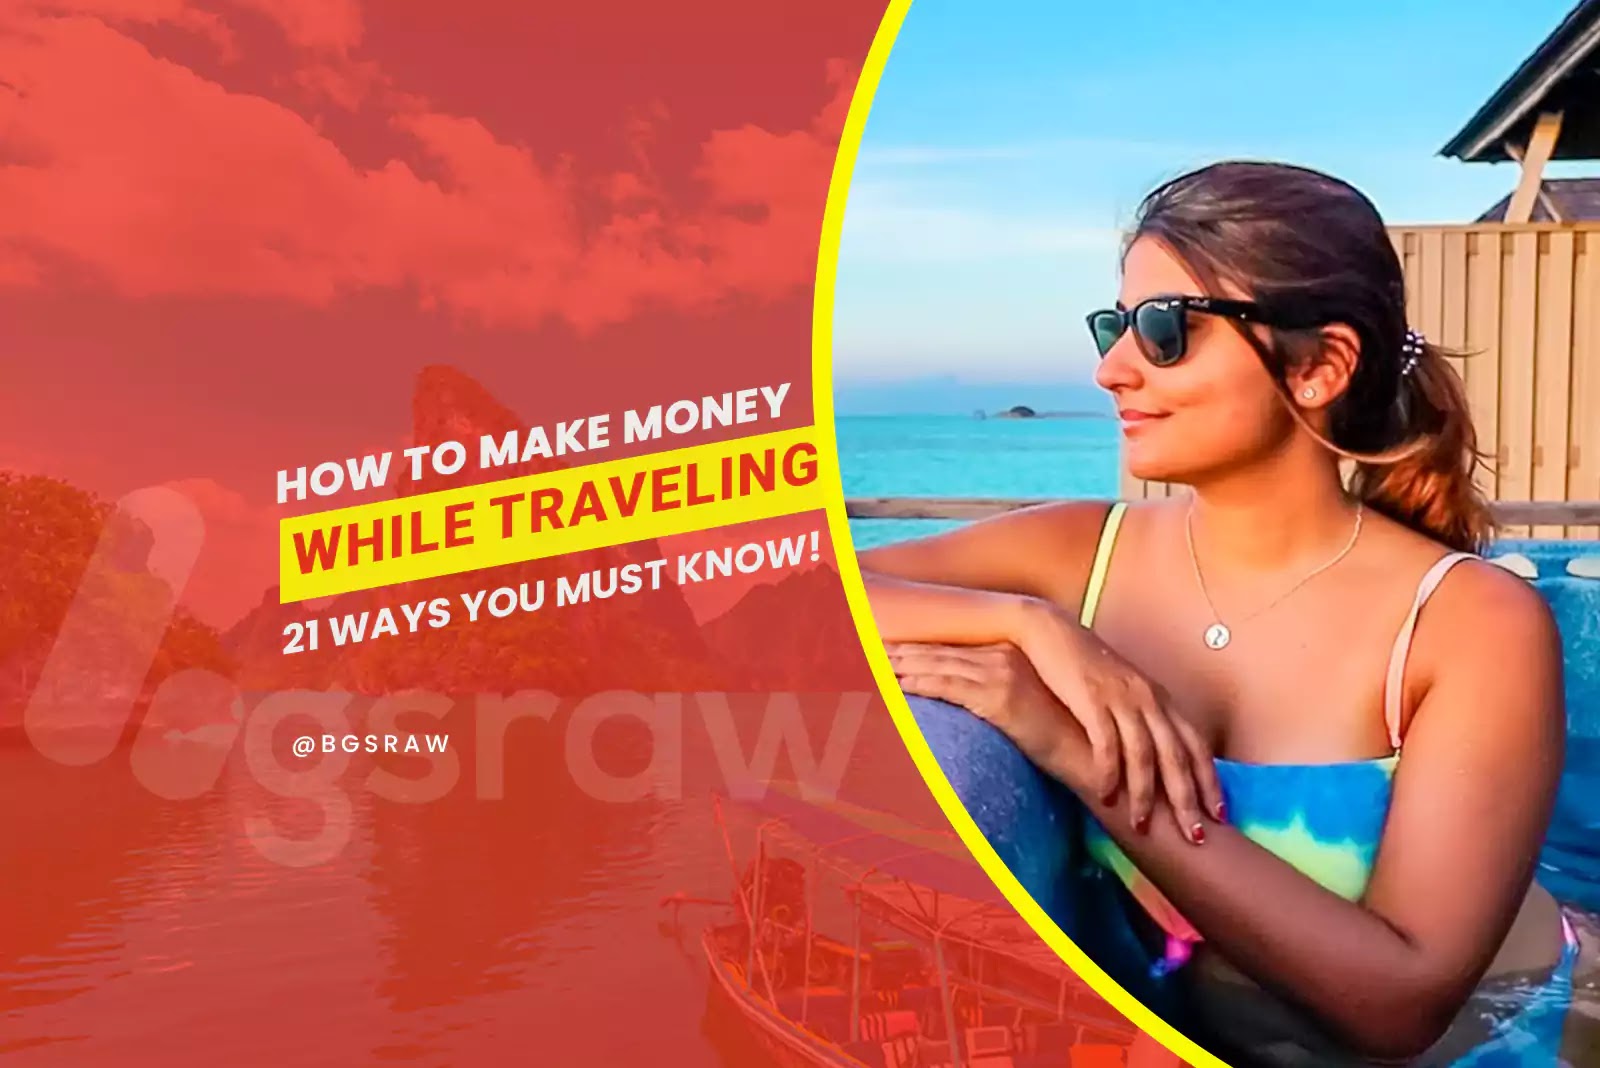 How to Make Money While Traveling, 21 Ways You Must Know!